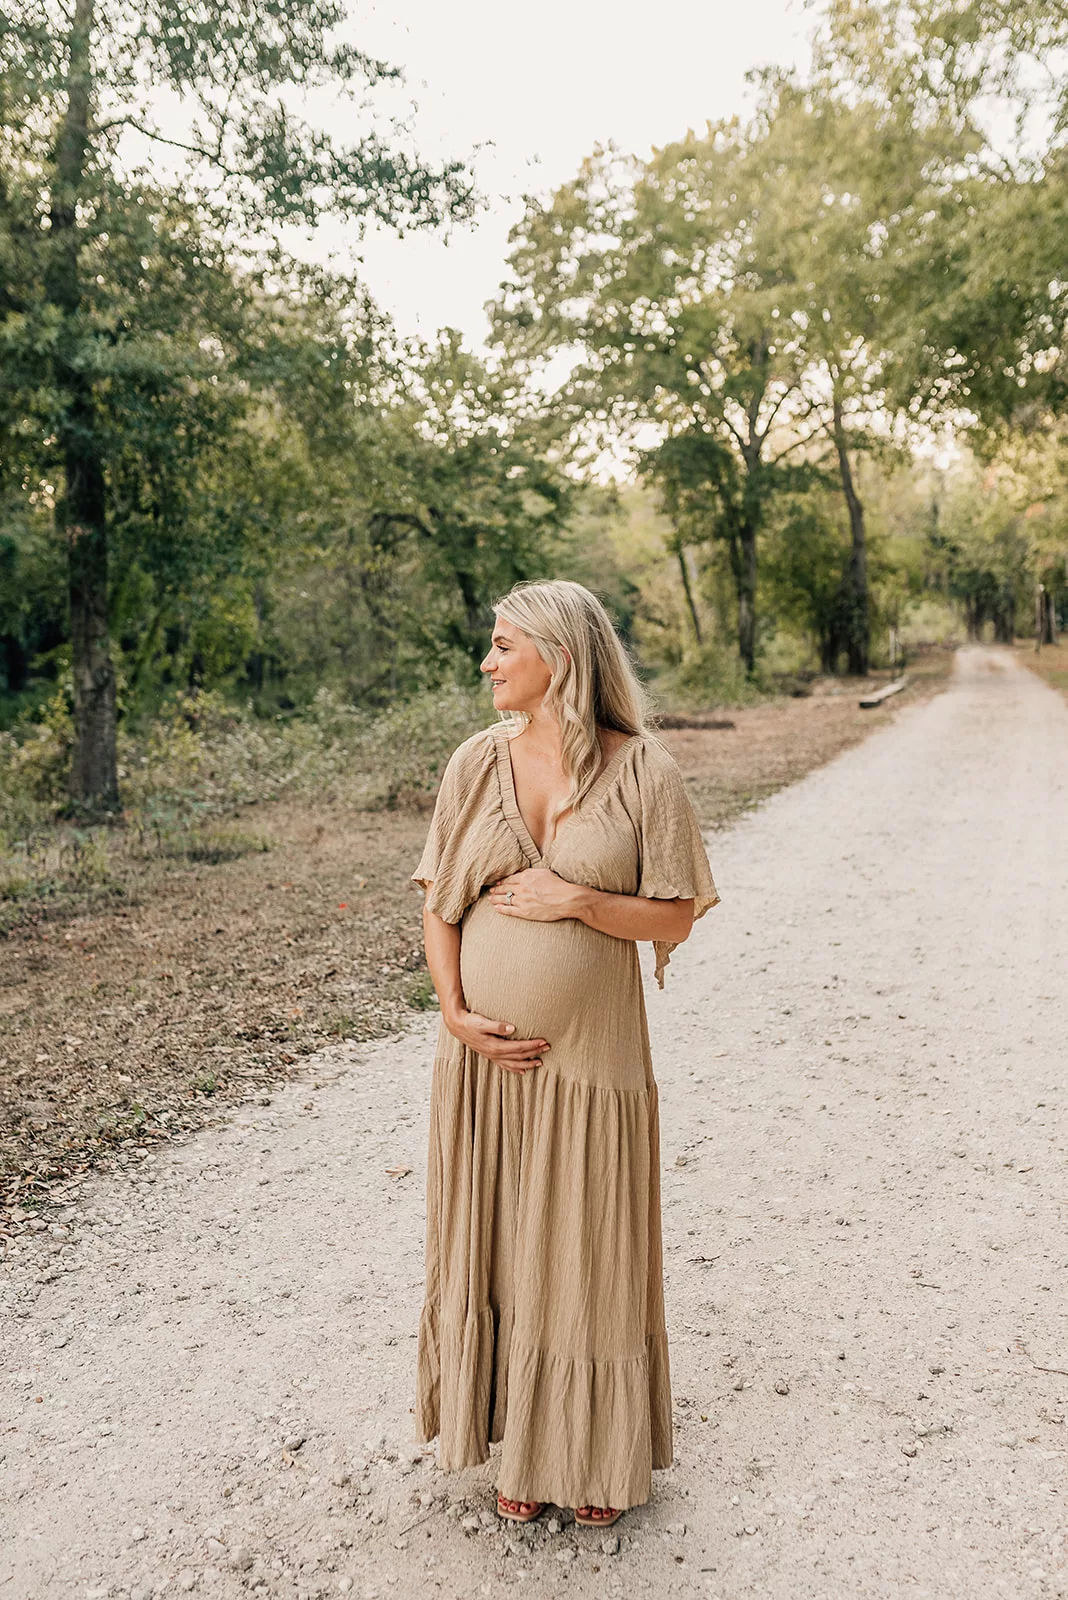 A mother to be happily walks down a park gravel trail while holding her bump in a brown dress